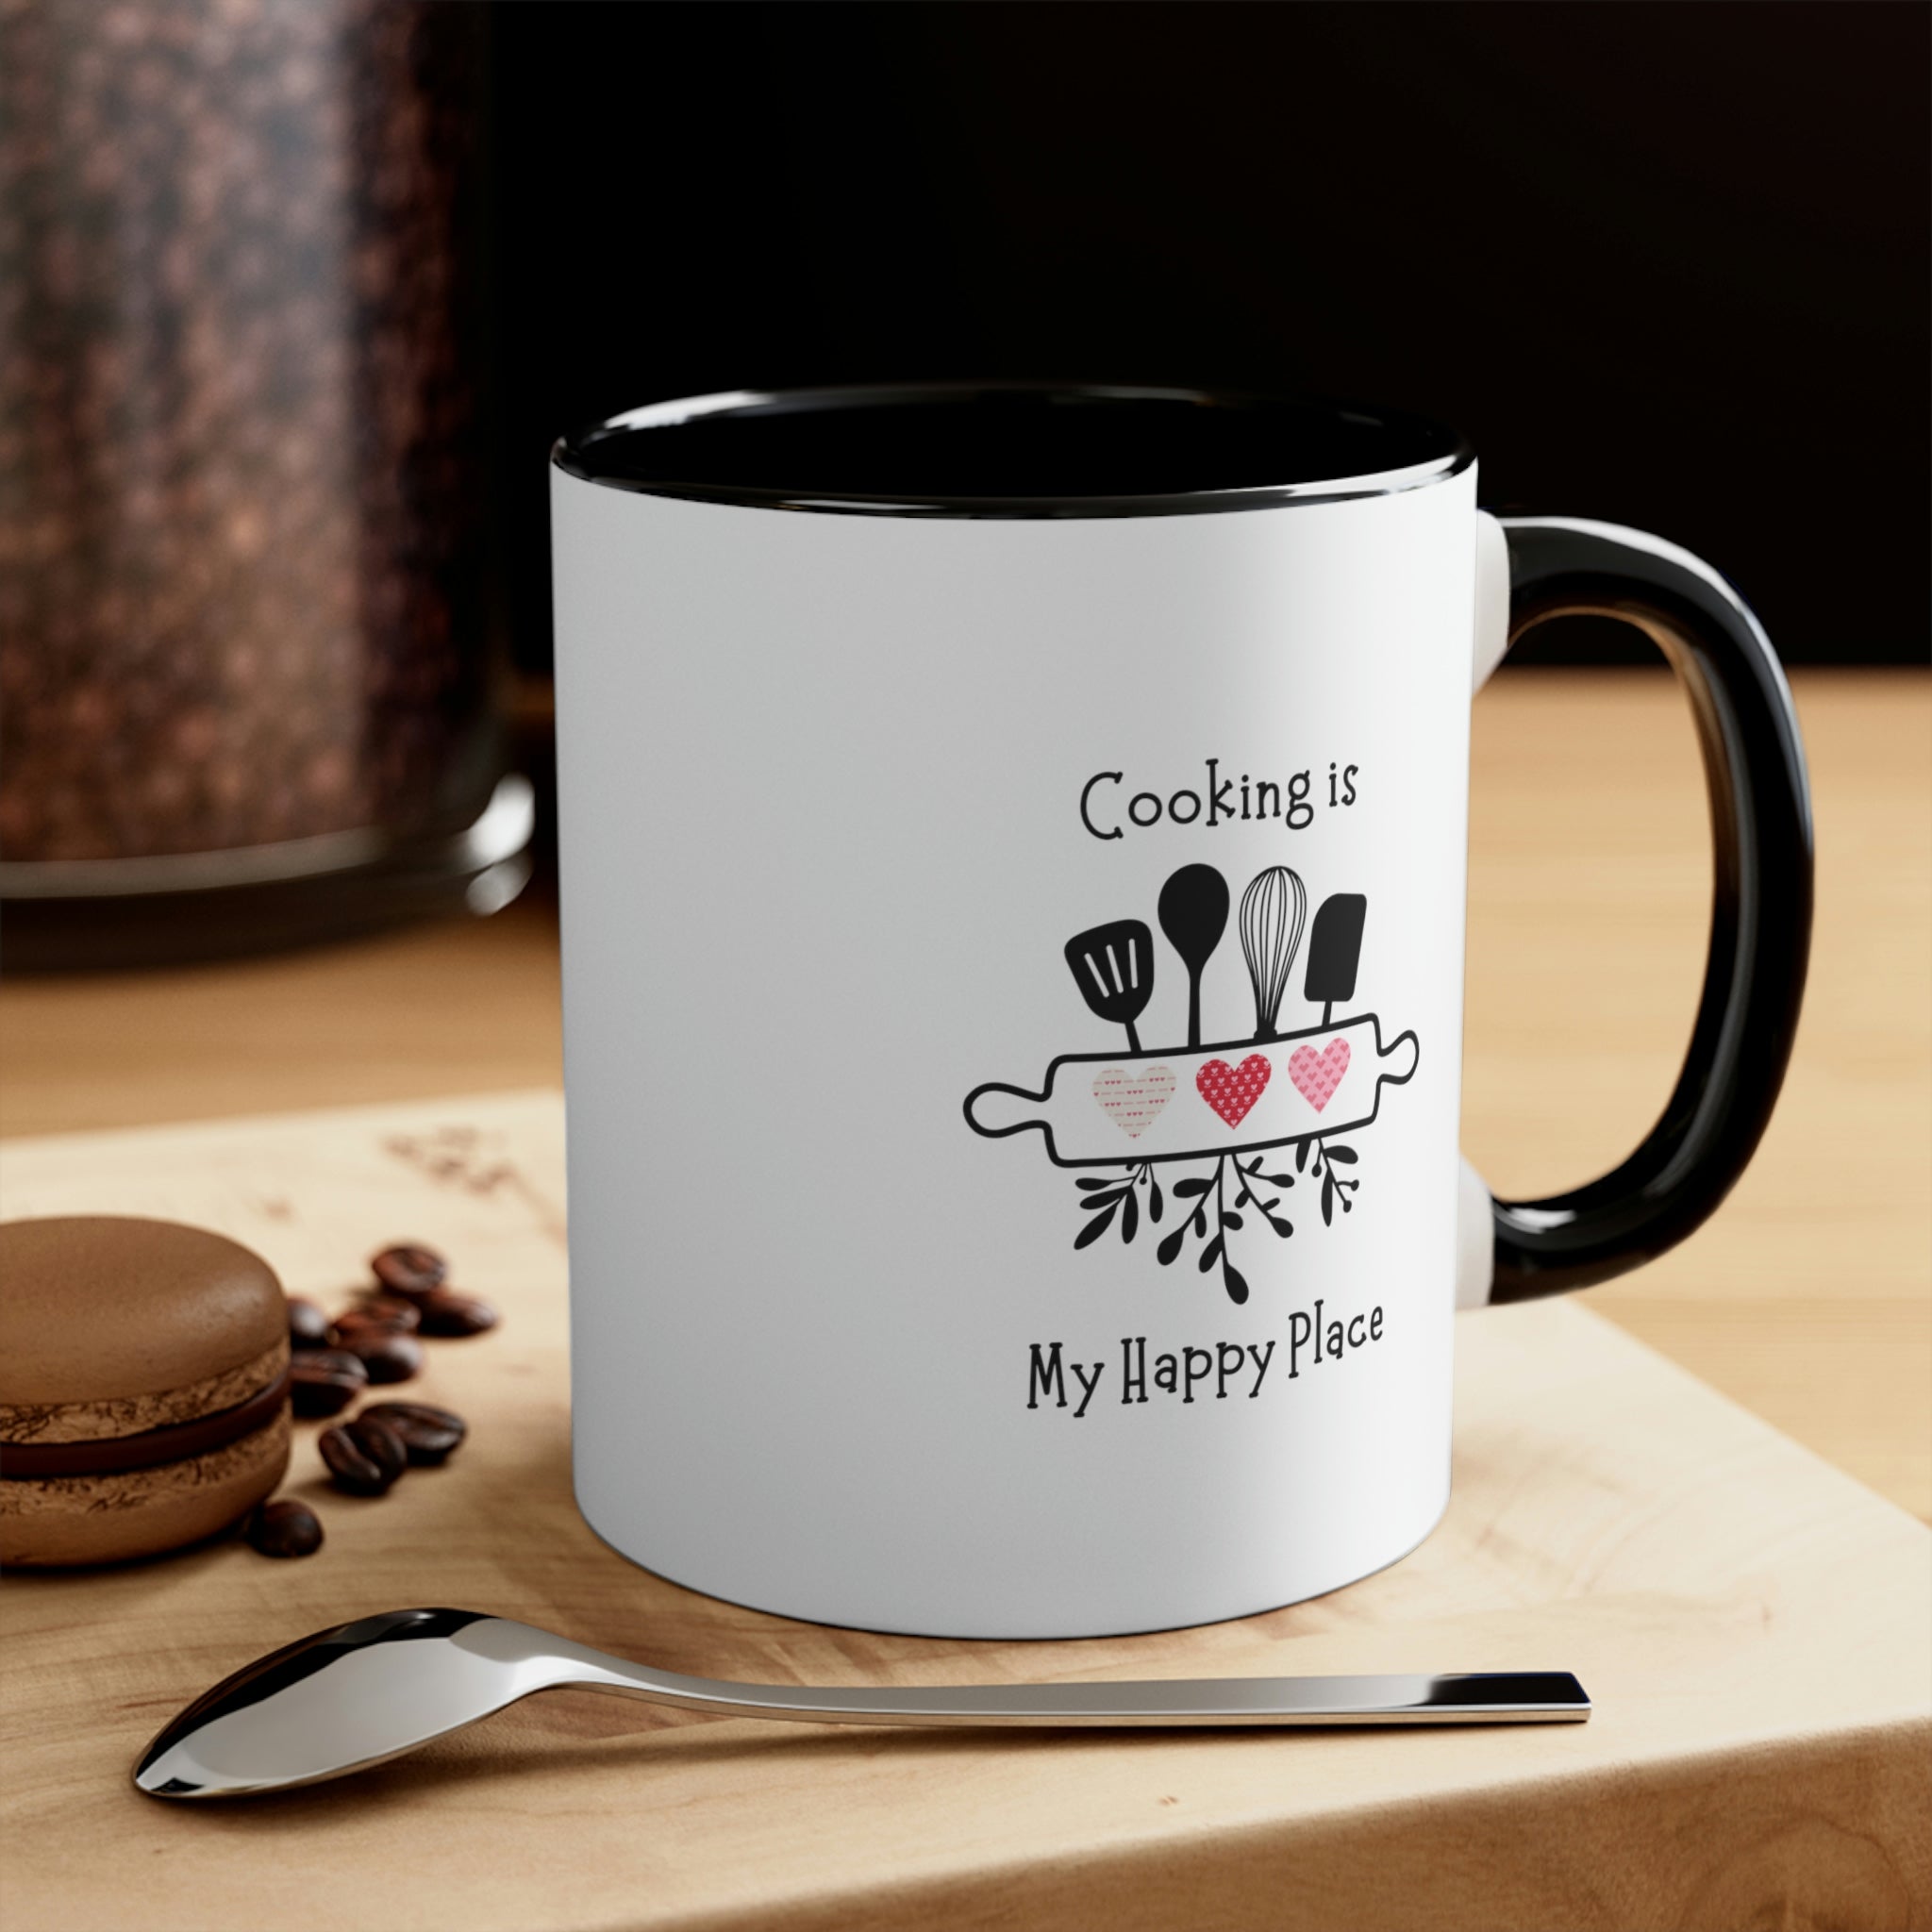 Coffee Mug, Cooking is My Happy Place 11oz Ceramic Mug with Light-Hearted Design, Dishwasher and Microwave Safe, Perfect Gift for Hot Beverage Lovers - cooking mug 5